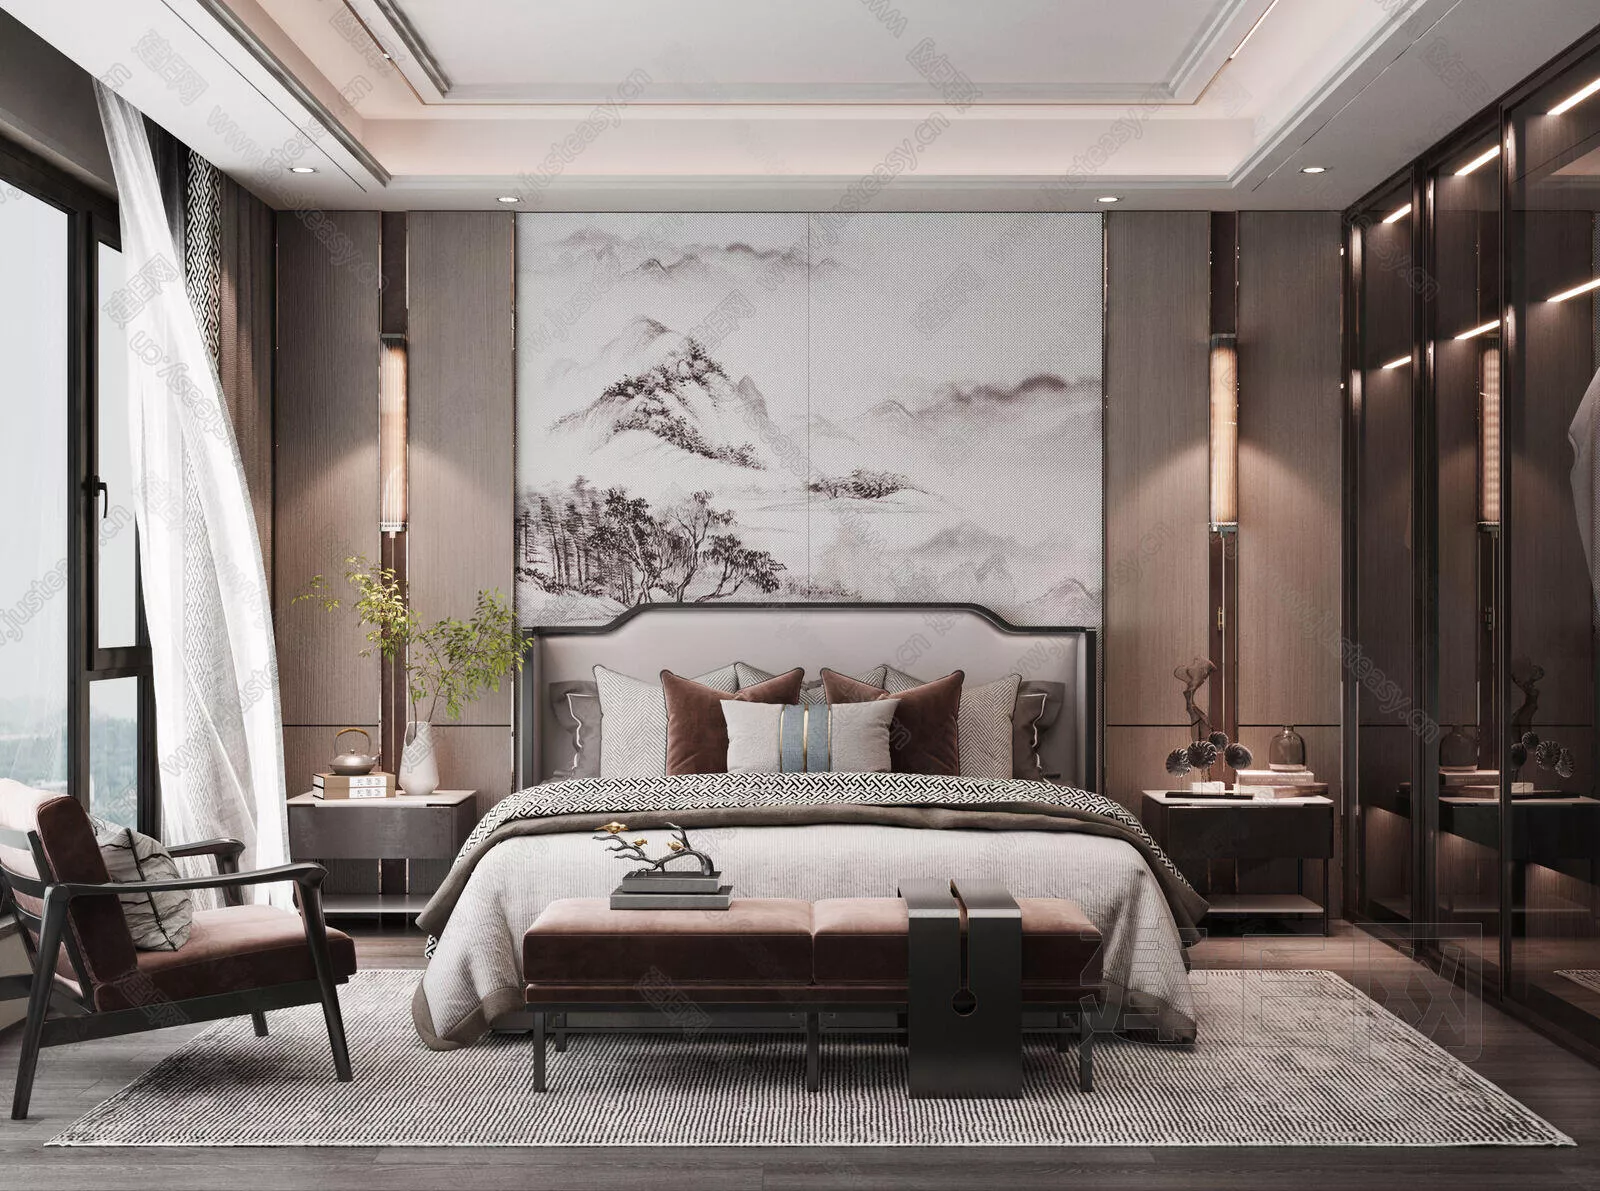 CHINESE BEDROOM - SKETCHUP 3D SCENE - VRAY - 100877451